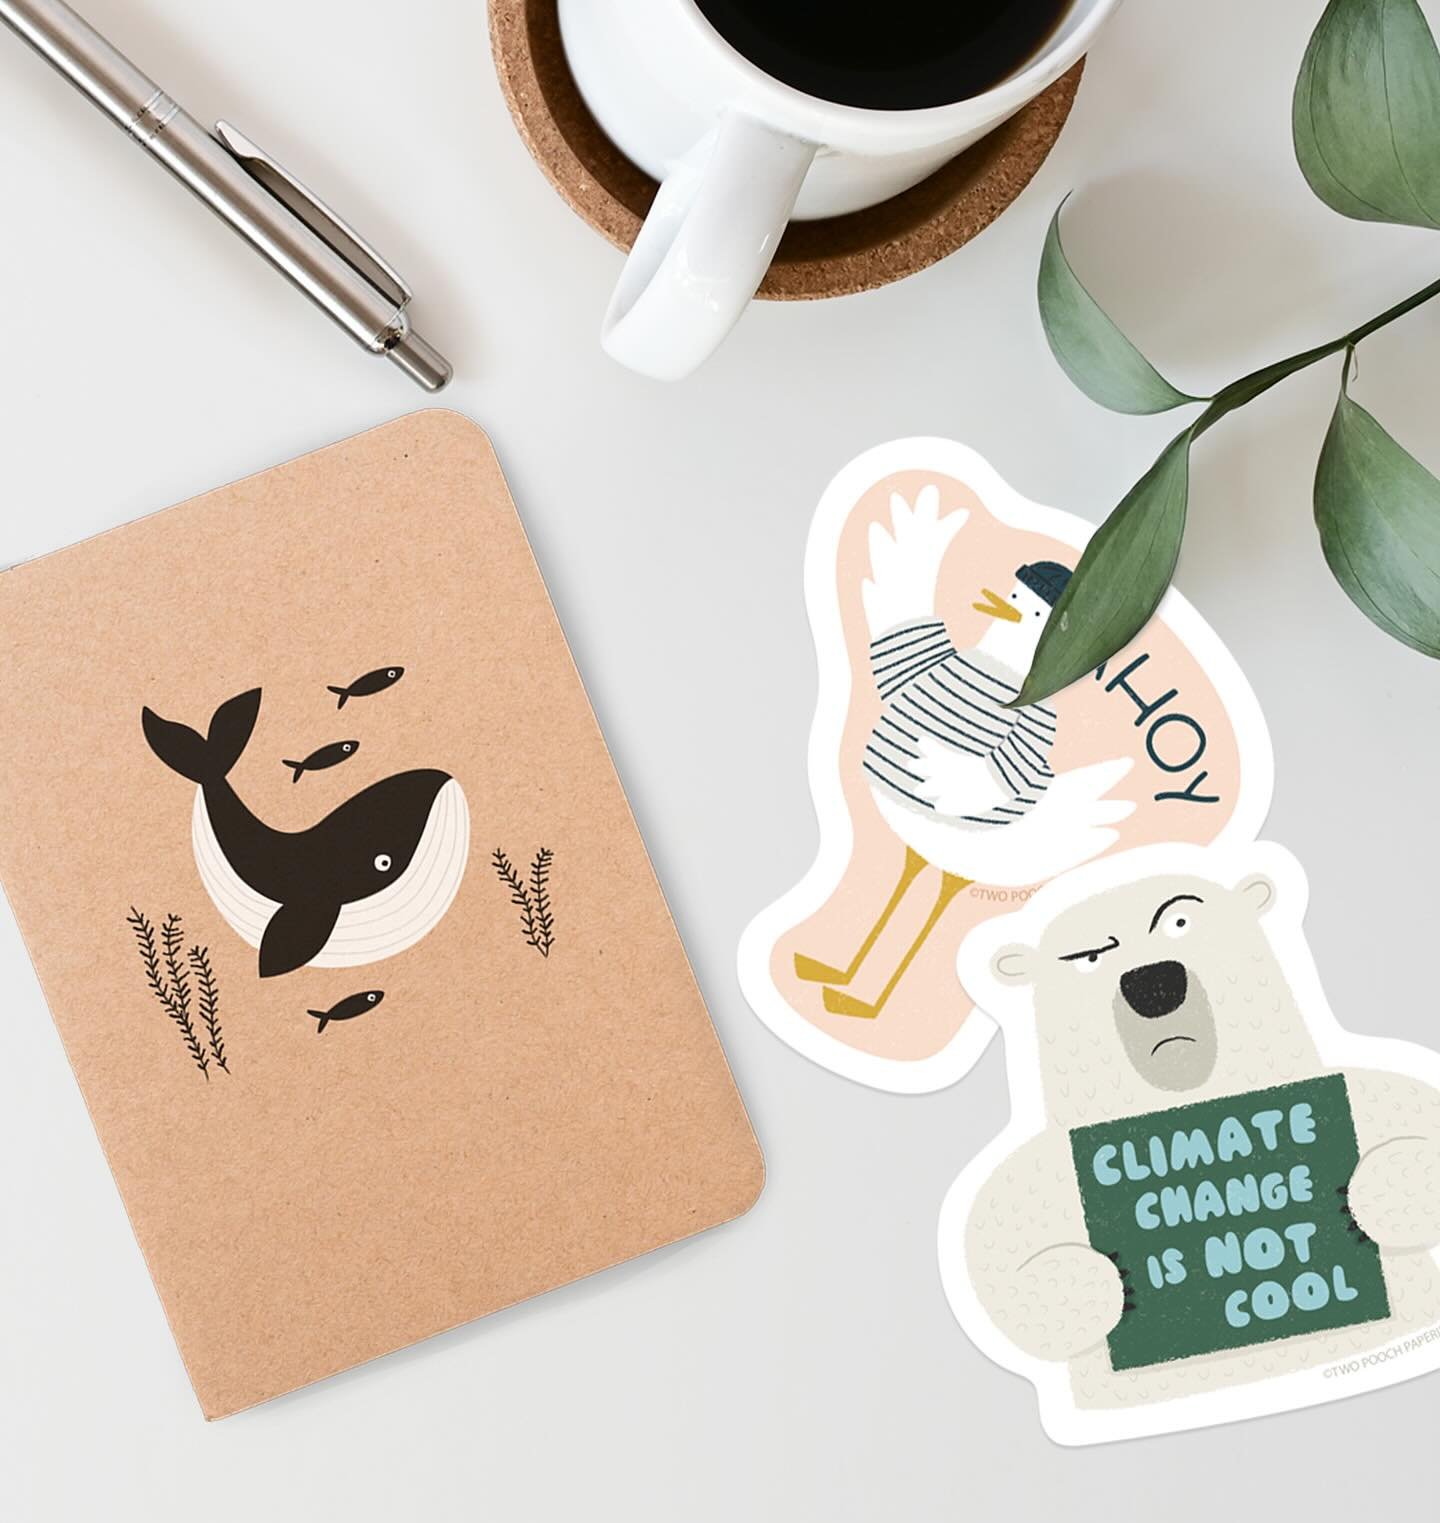 In the mood for a spring refresh? Grab some new stickers for your water bottle or one of my new pocket notebooks. 🐳

#pocketnotebook #stickeraddict #stickerlover #papergoods #whalelove #seagullsticker #stationery #springrefresh #climatechangesticker